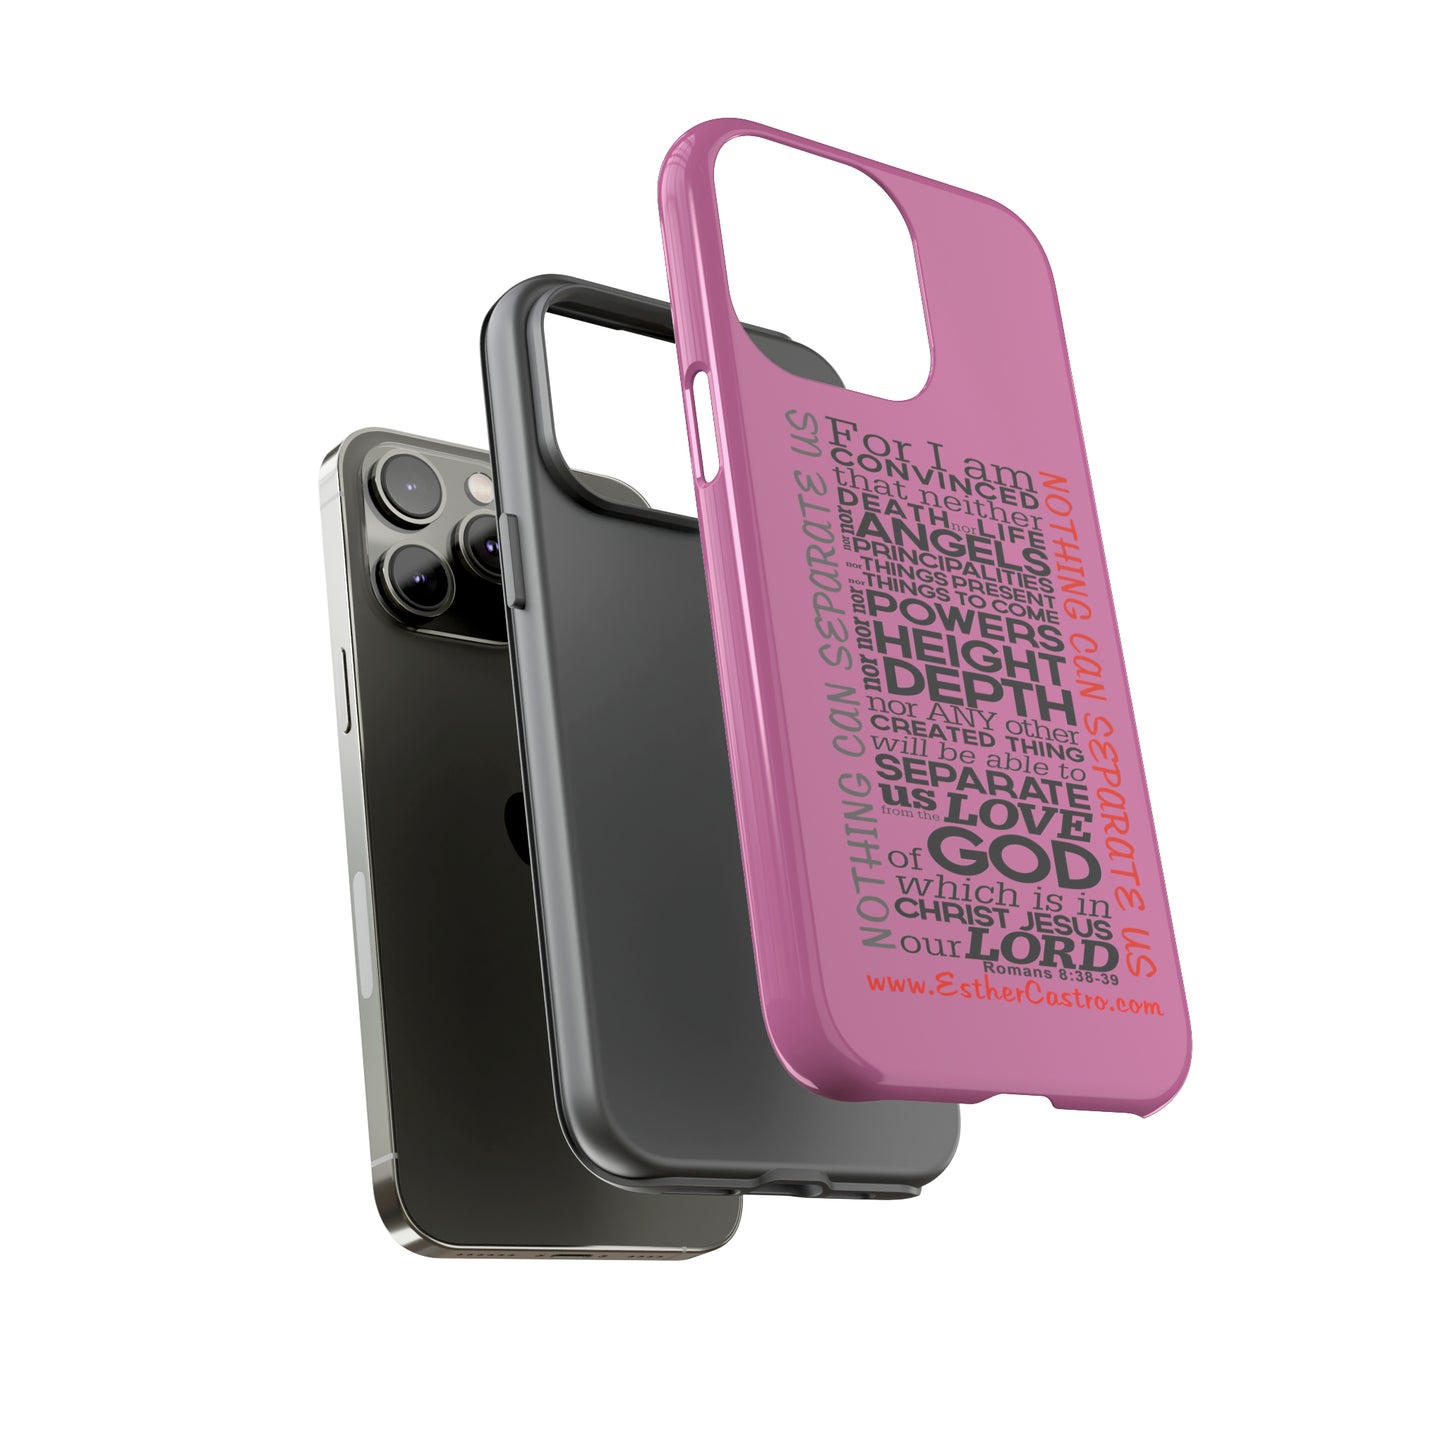 Tough Cases for Smart Phones - "Nothing Can Separate Us" Christian customized Tough Cases Romans 8, smartphone covers